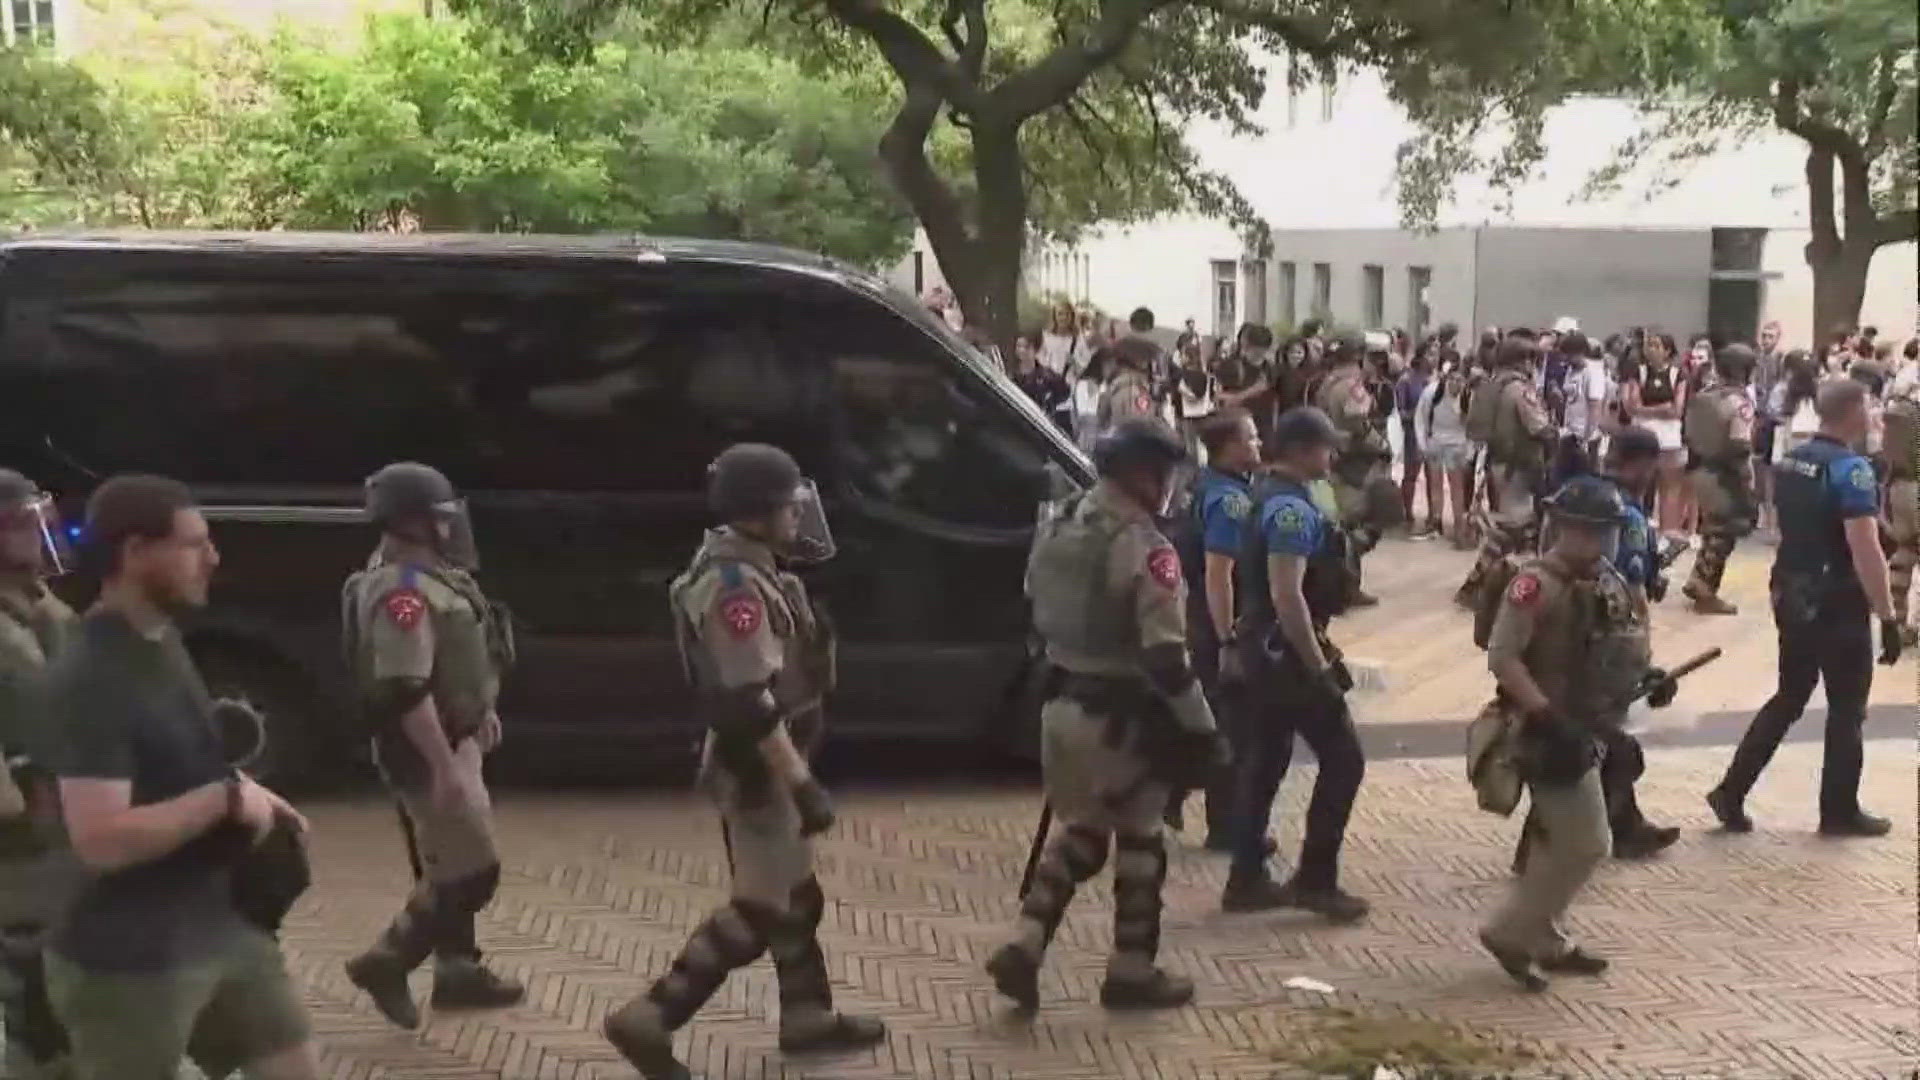 Pro-Palestinian protestors have been clashing with Texas DPS officers for several hours Wednesday.